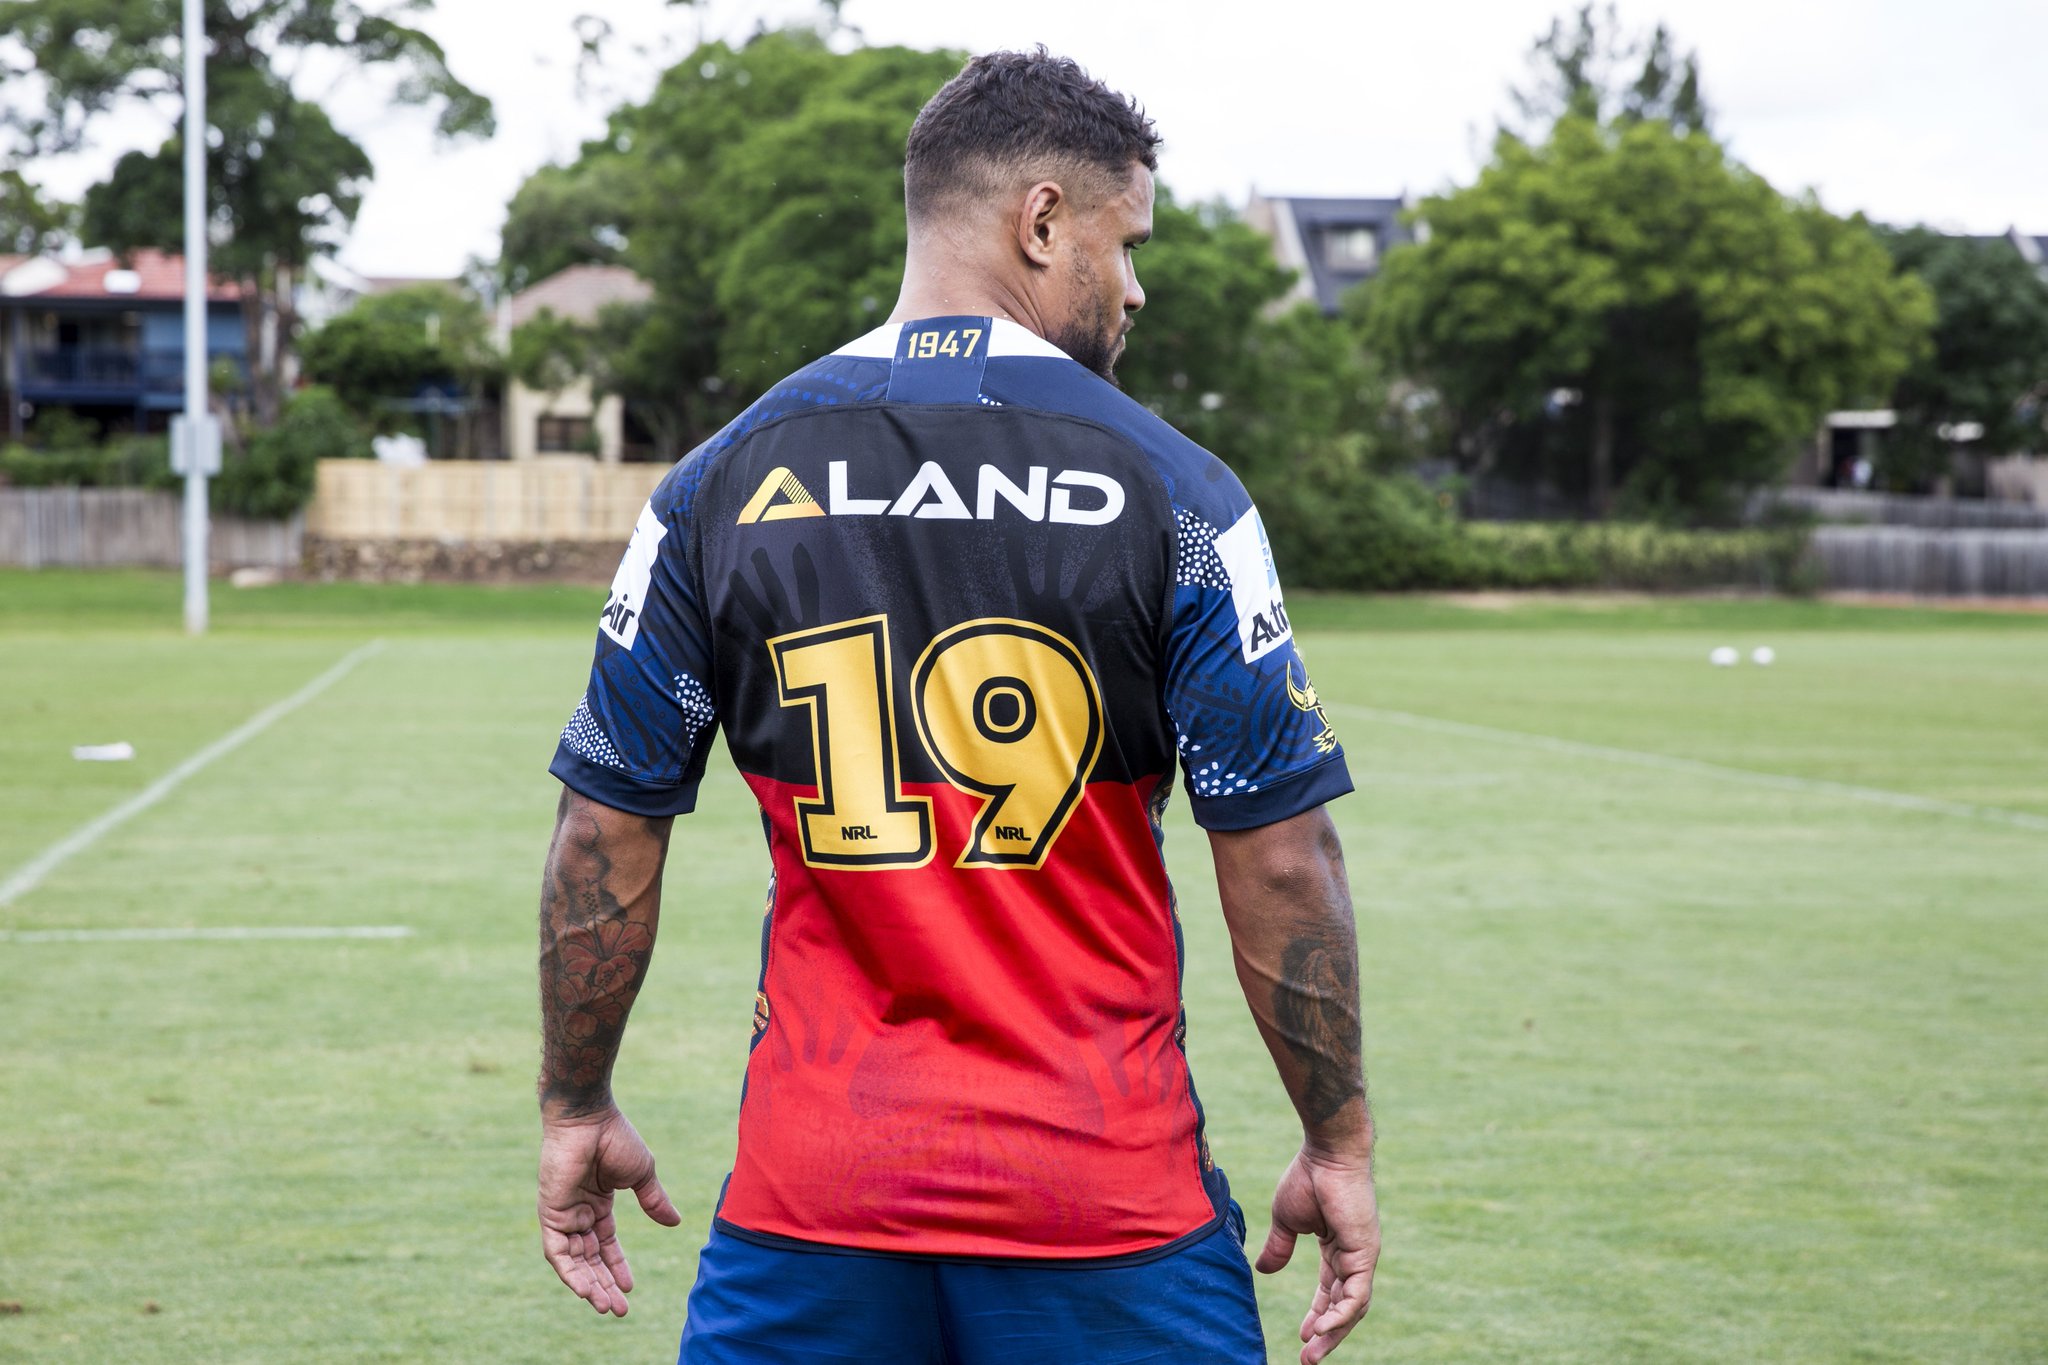 Parramatta Eels On Twitter It Means A Lot Not Just For Myself But For My Family And The Parramatta Community Hoffman On Designing The Eels 2019 Indigenous Jersey Watch The Full Video